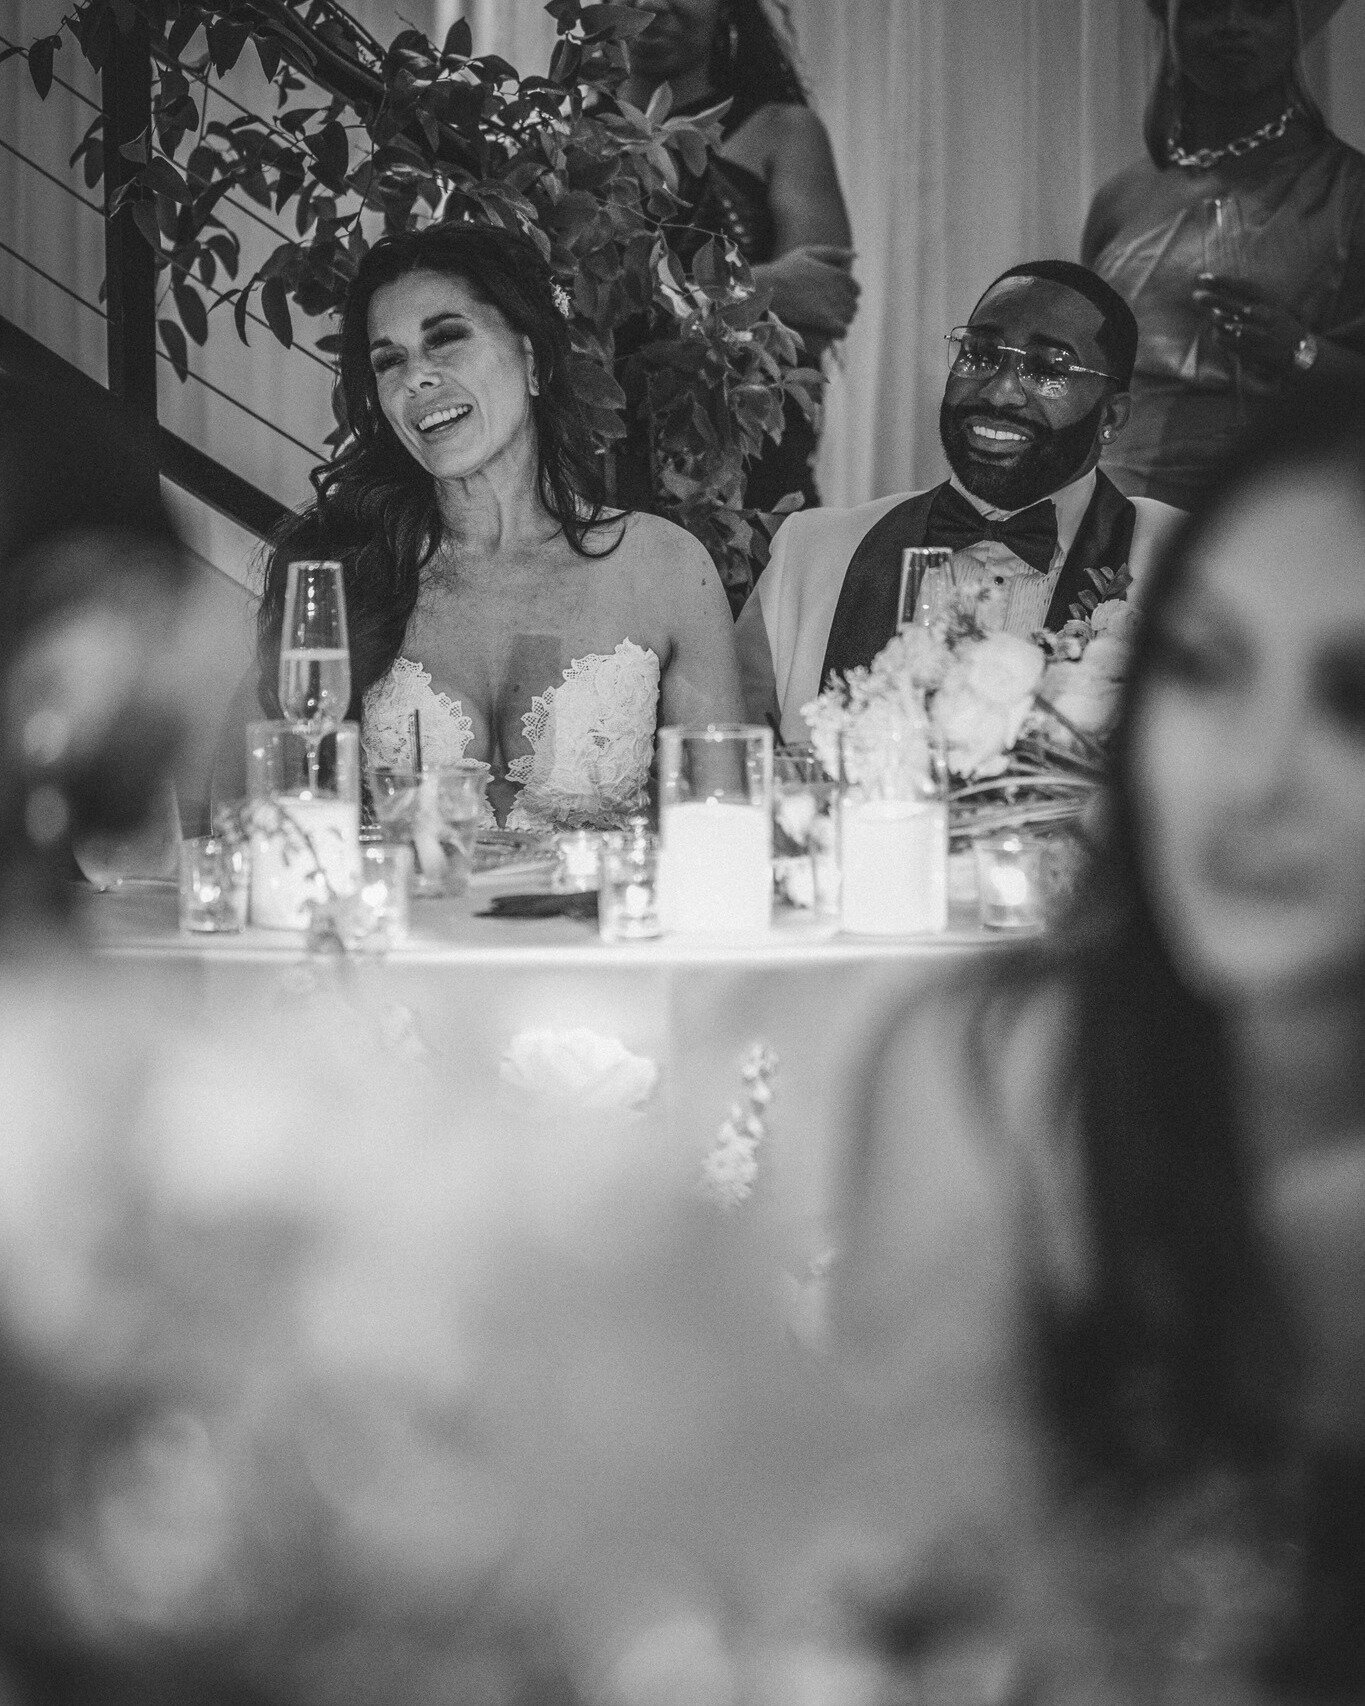 This smile says it all 🤍✨
Our indoor receptions create a naturally private, intimate, and romantic setting for you to enjoy special moments with your closest friends and family. 
If you'd like to see for yourself, contact us on our website or give u